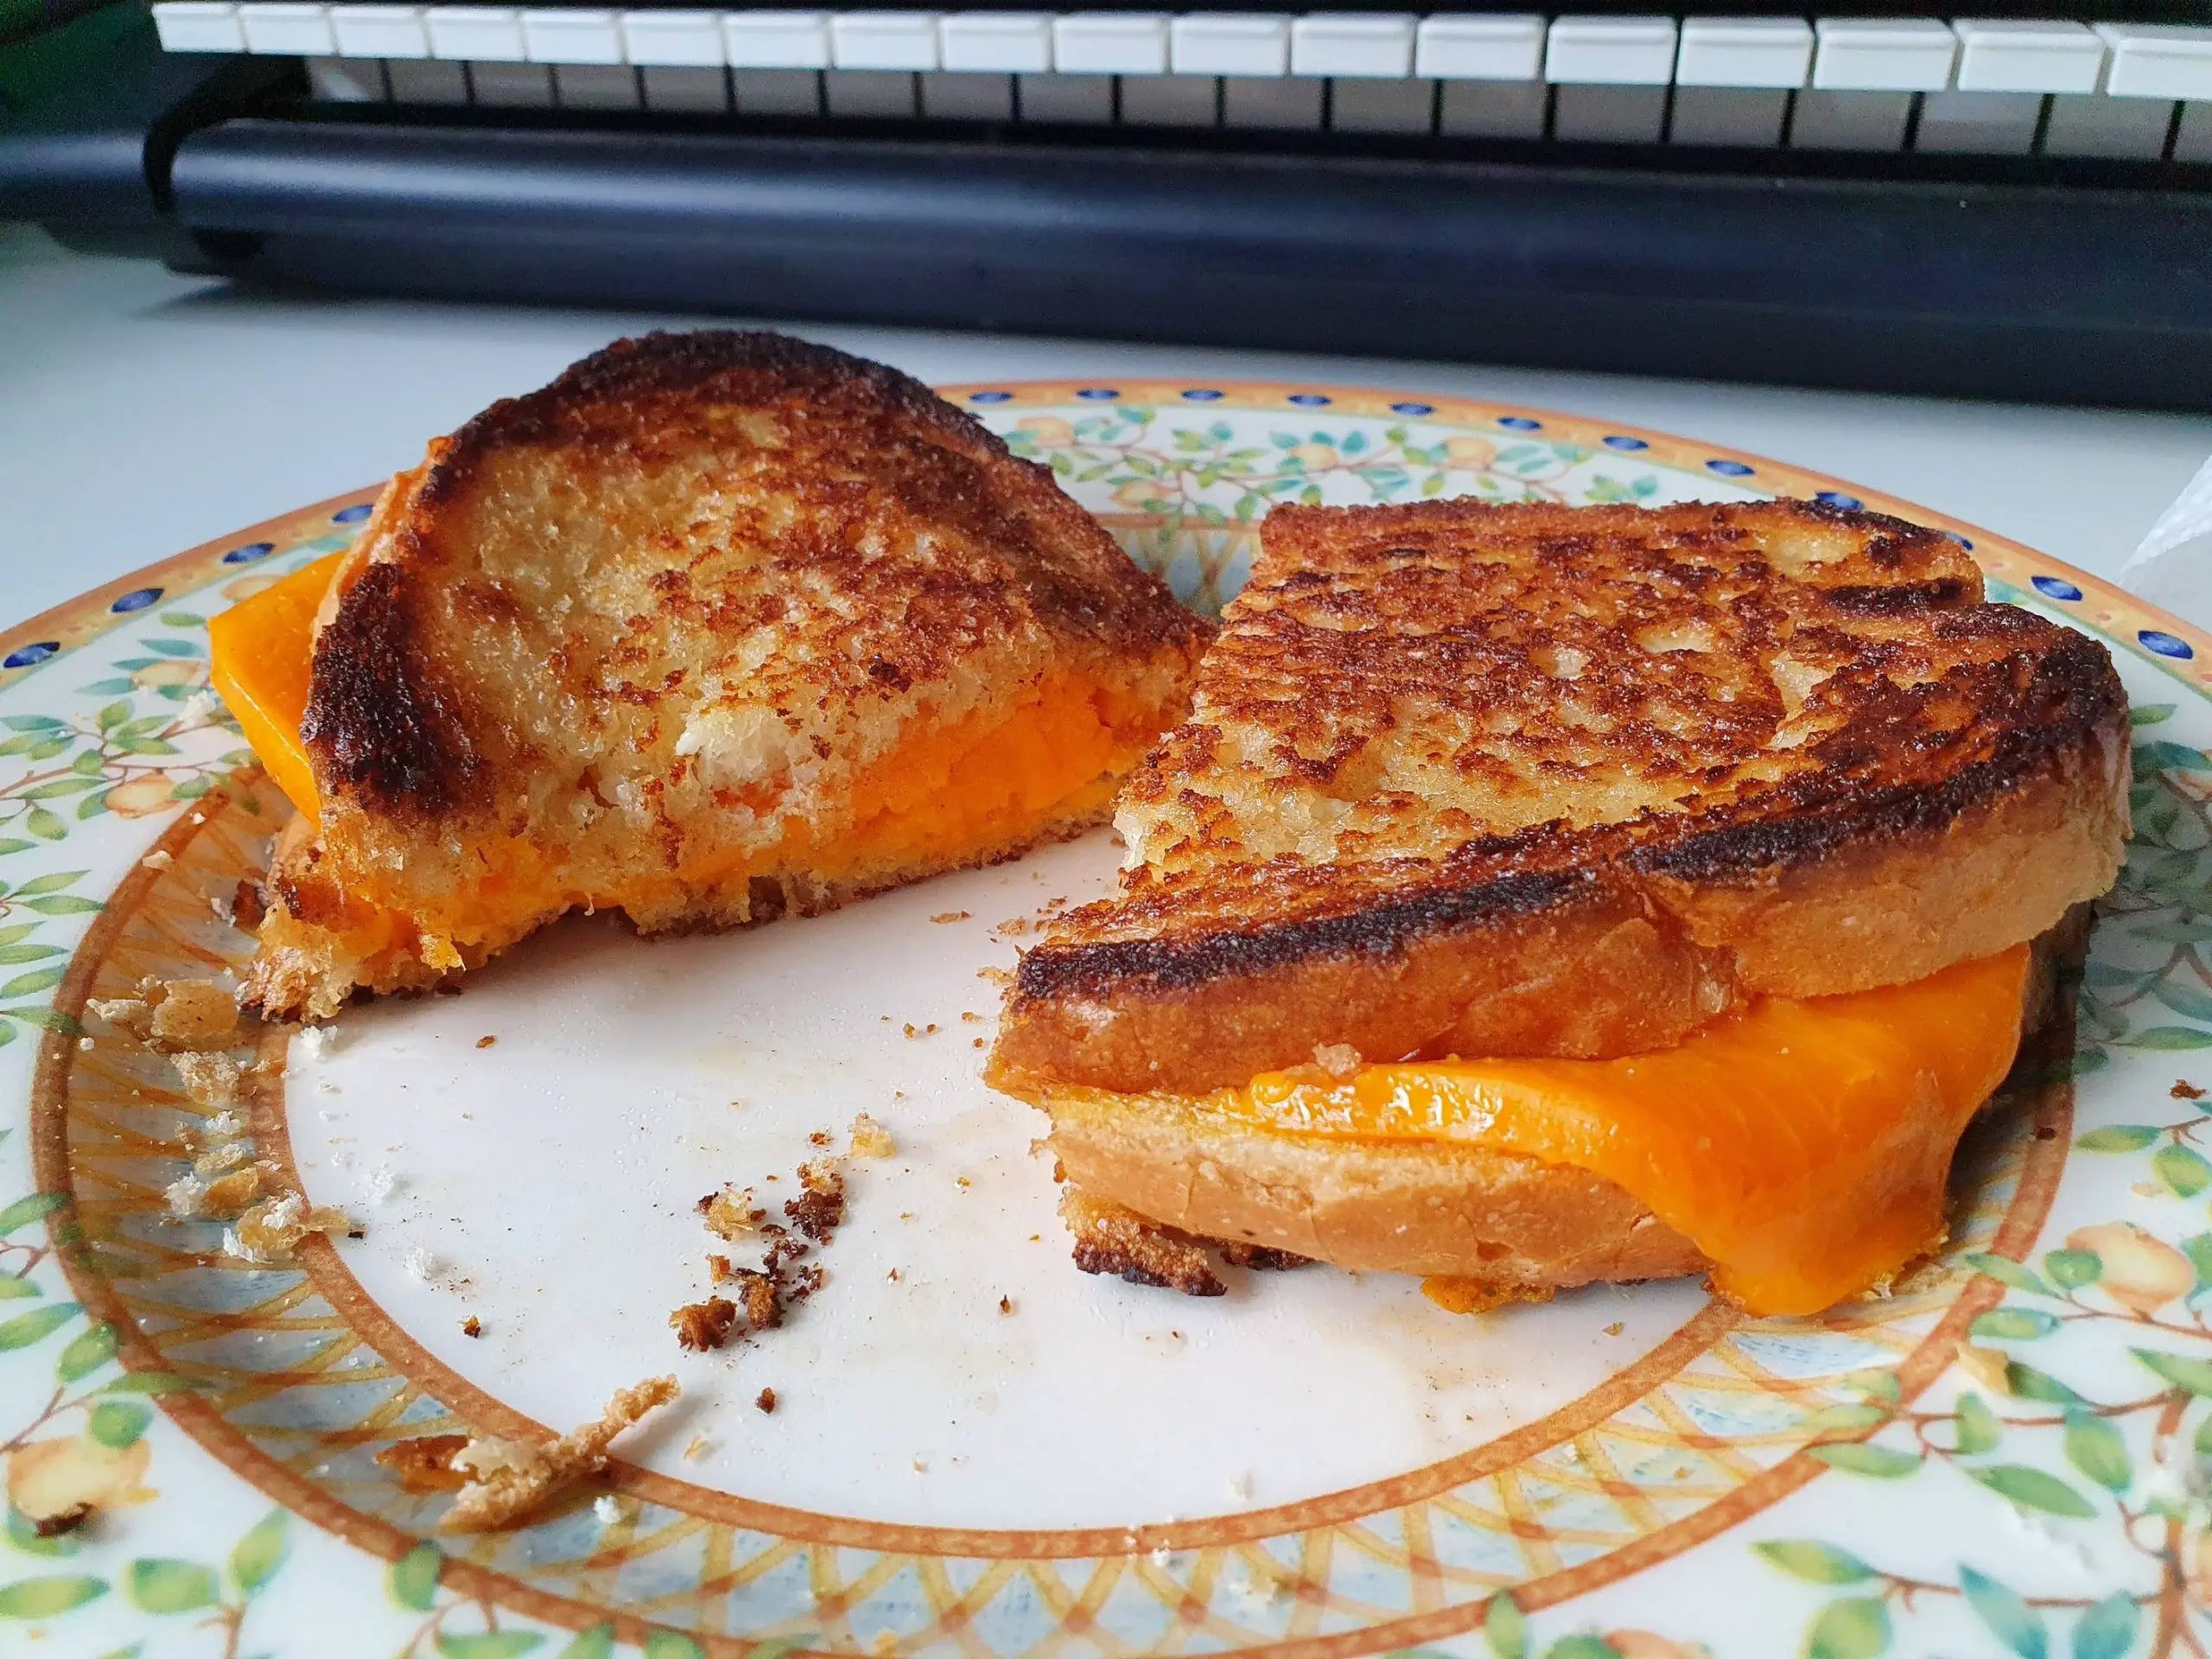 Grilled cheese with red leicester. Still new to making these ...